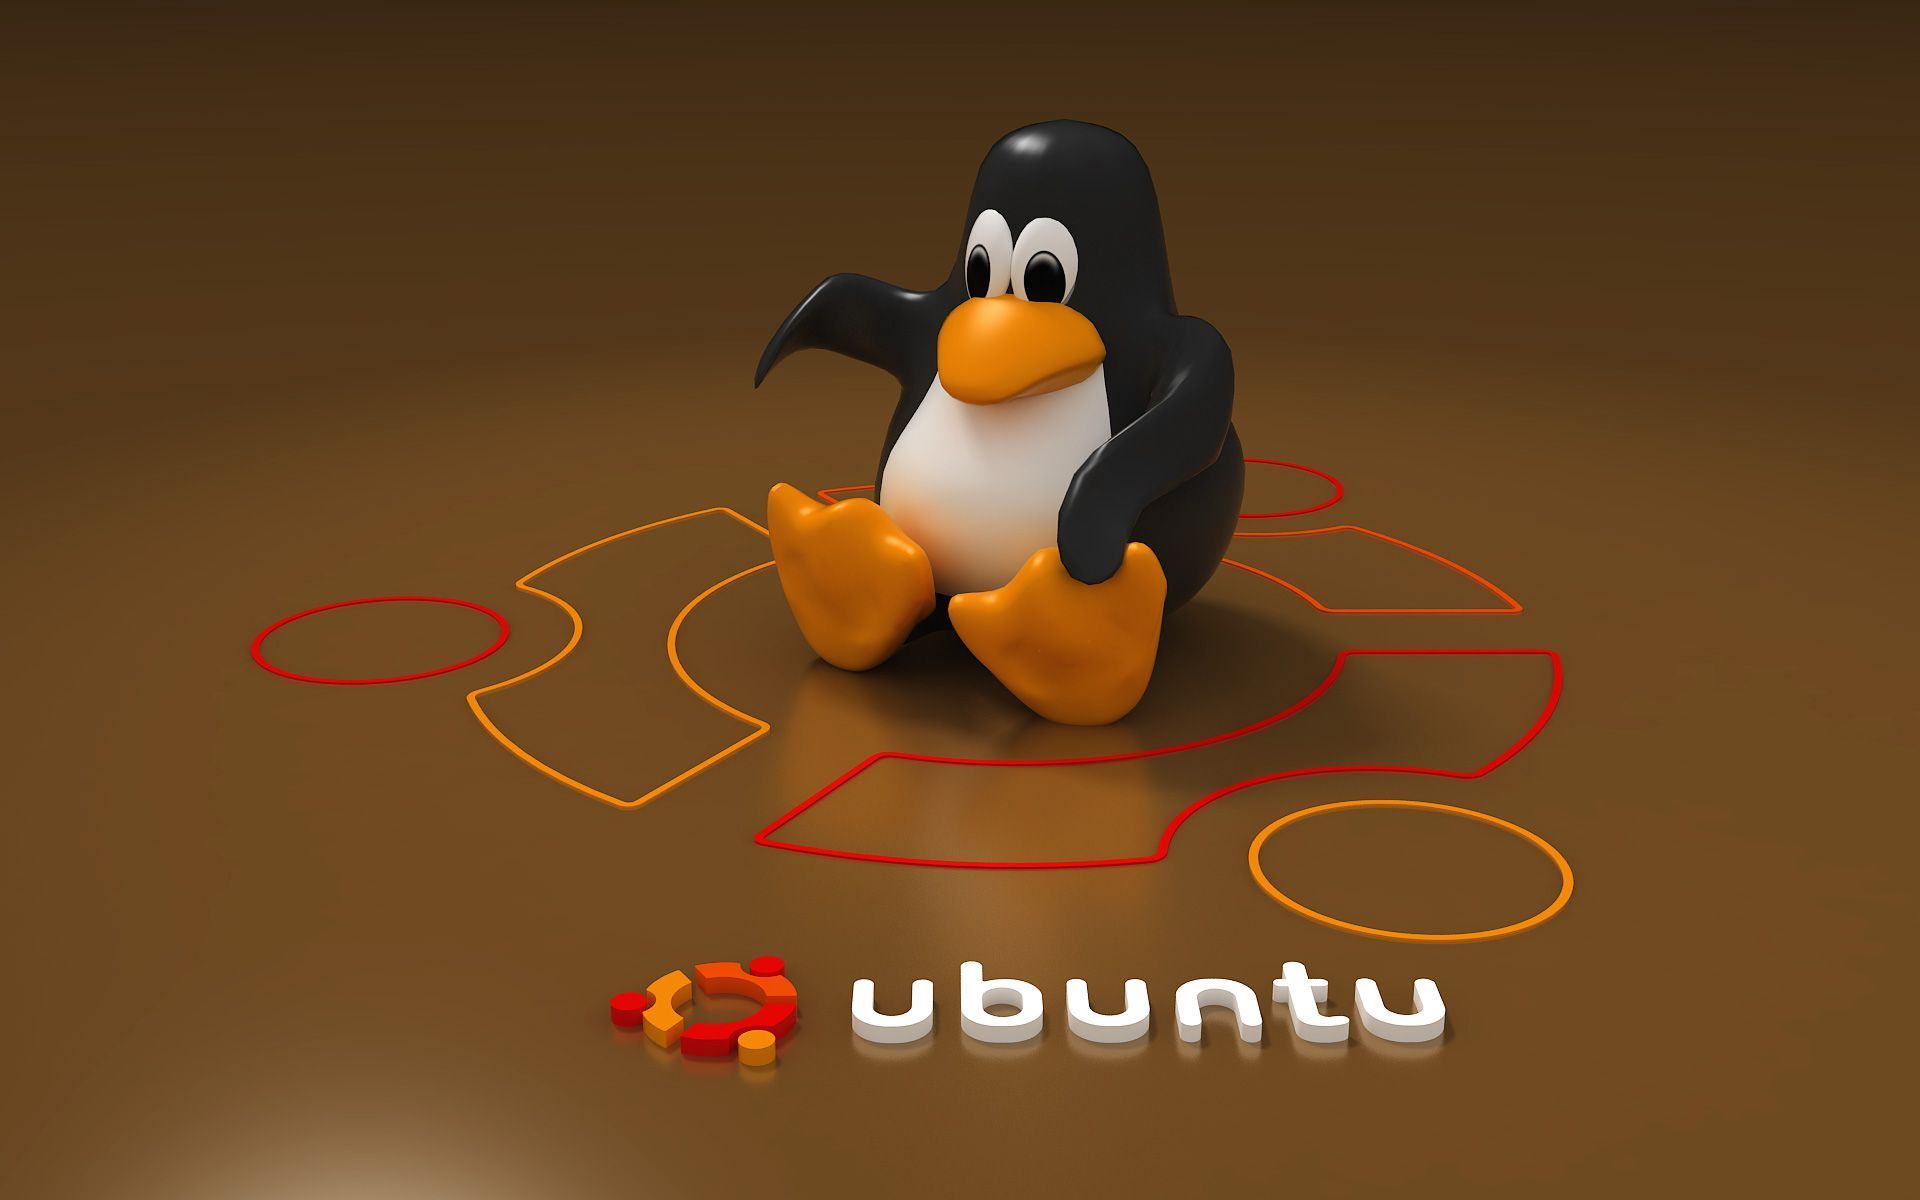 Ubuntu Wallpapers In HD For Desktop To Download For Free